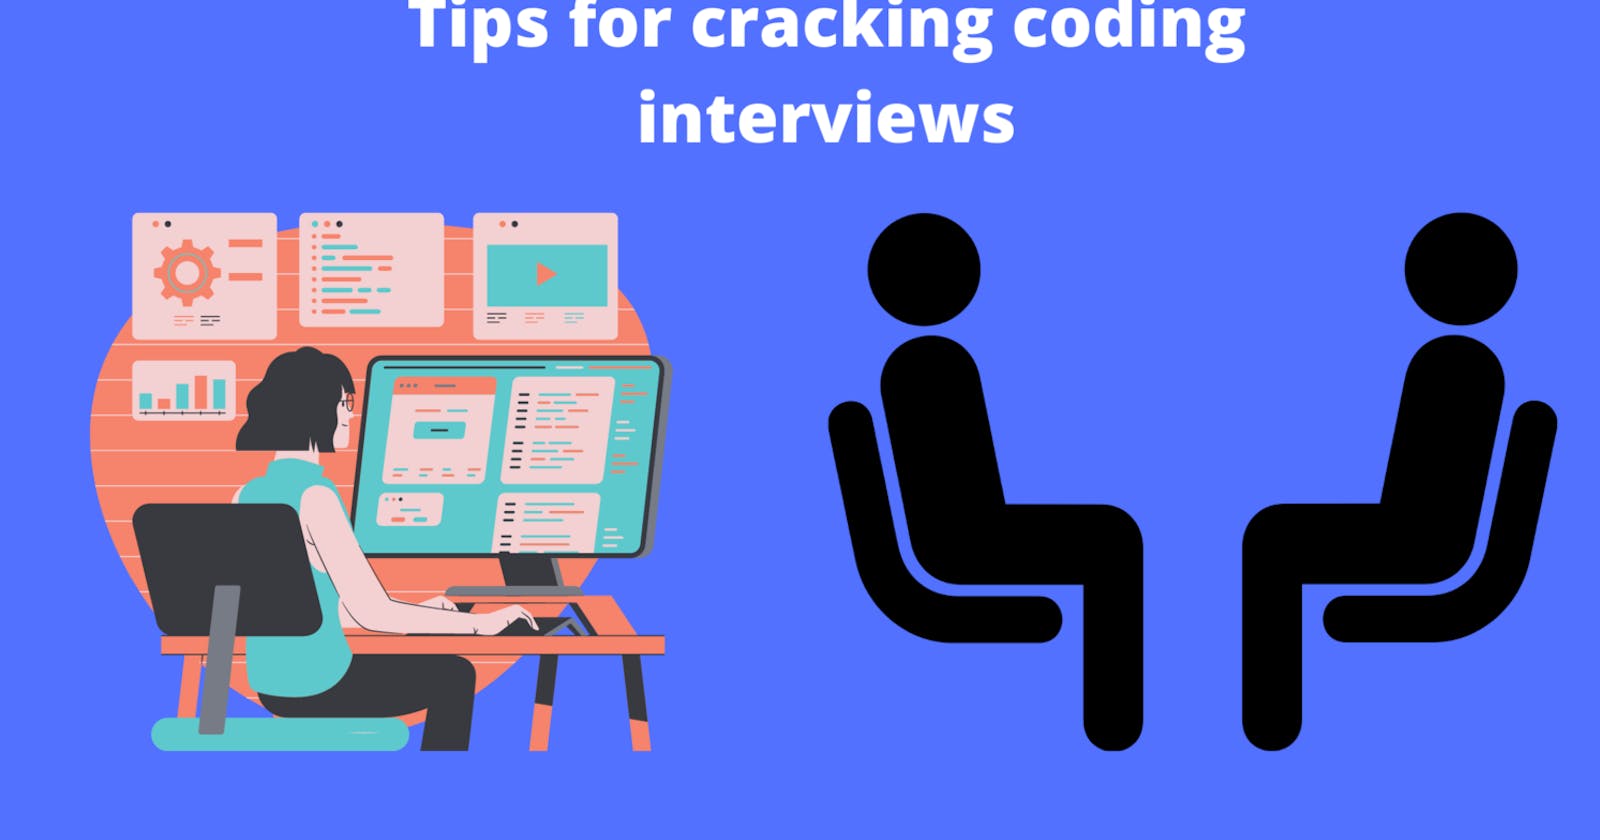 My learnings from giving coding interviews